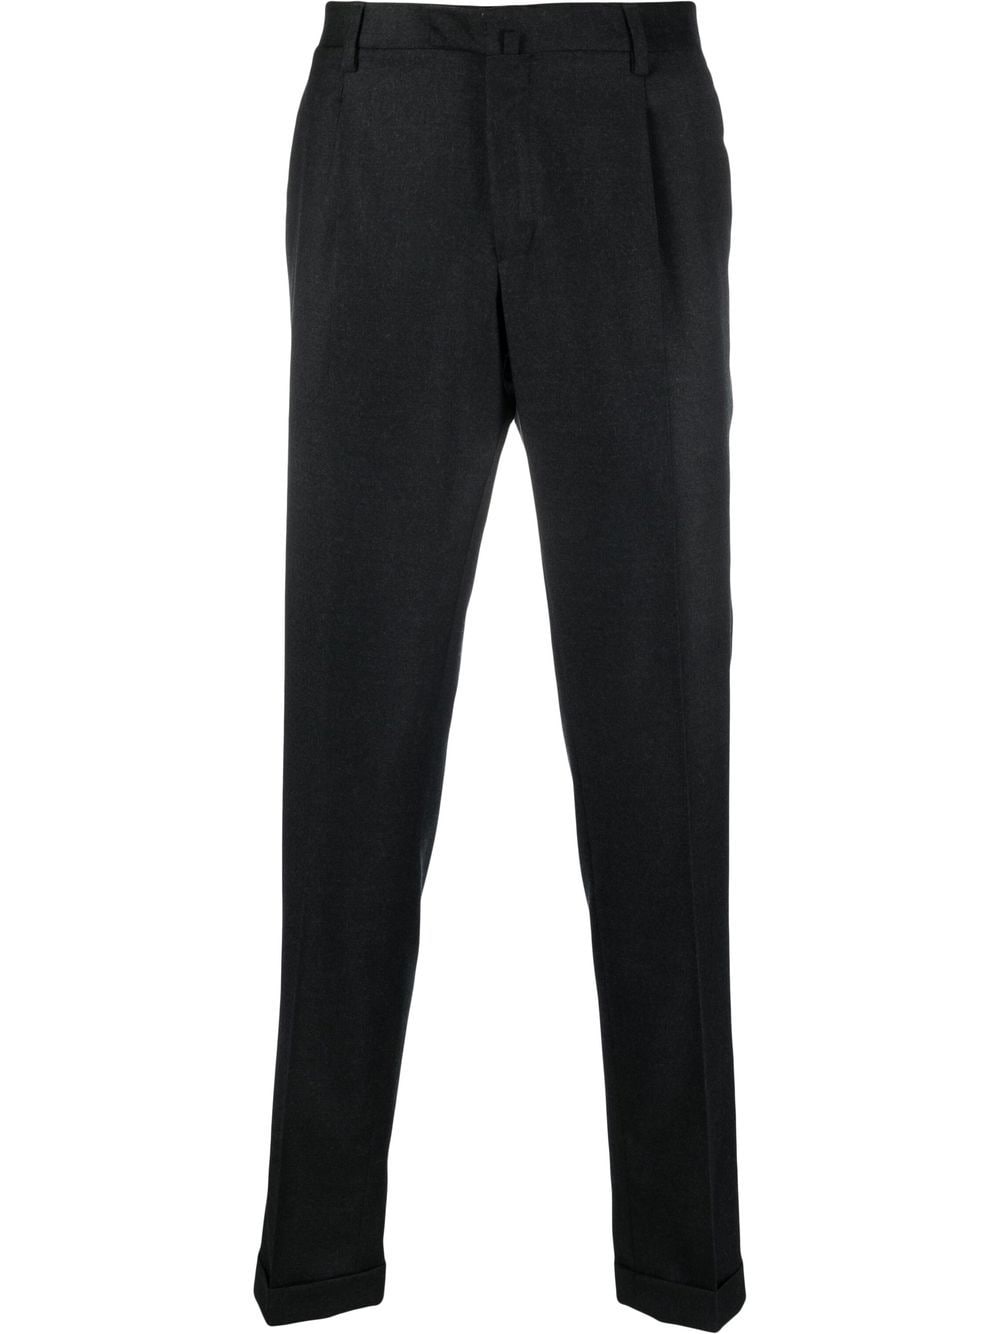 ASOS Turn Up Tapered Smart Trousers in Black for Men  Lyst